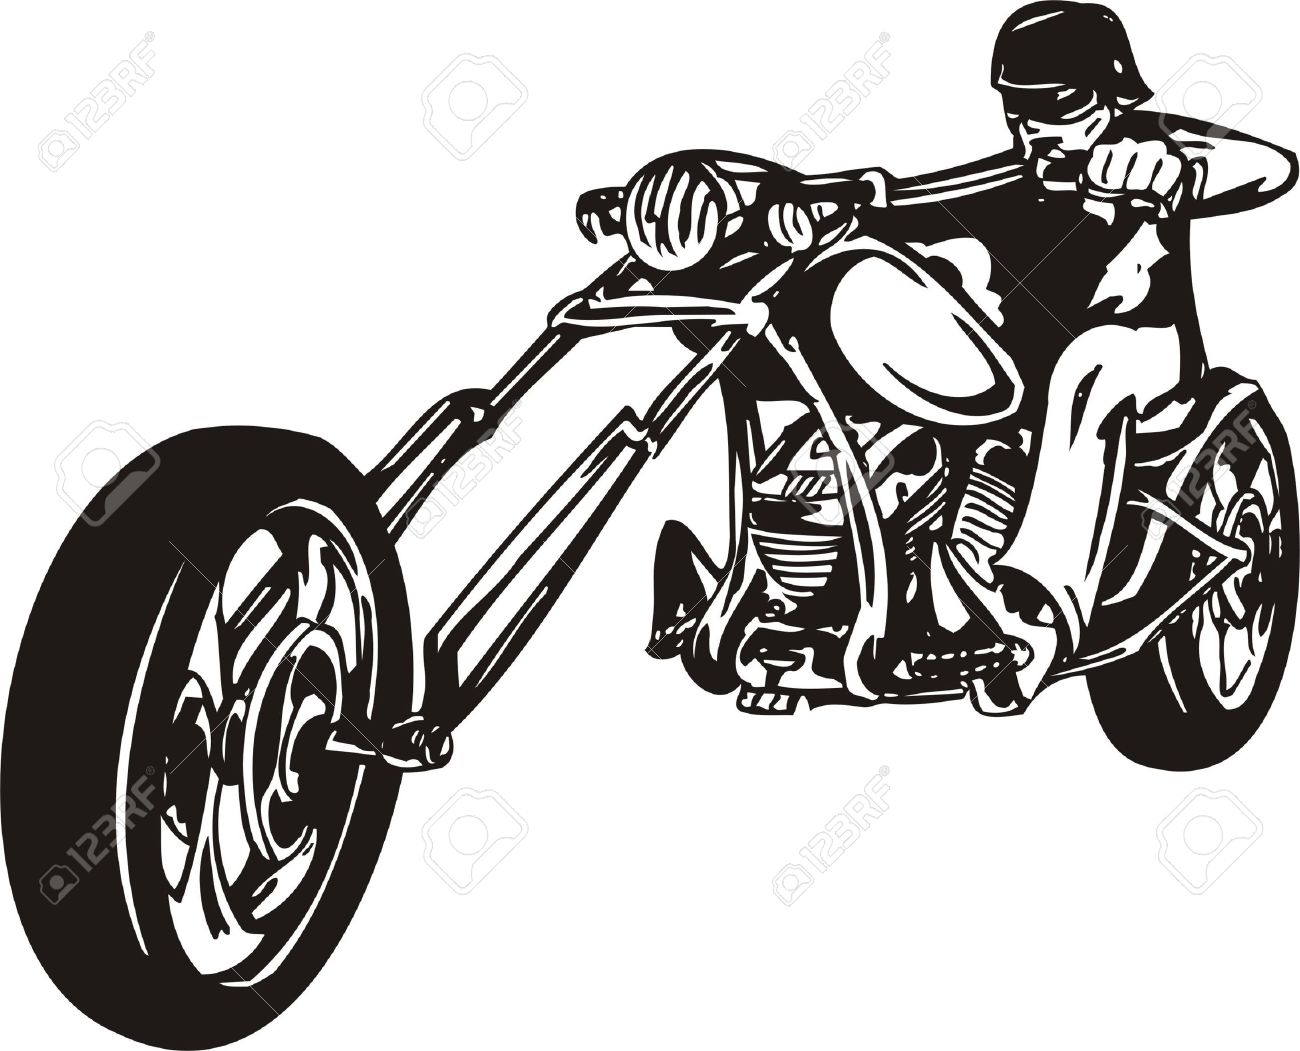 Choppers clipart - Clipground